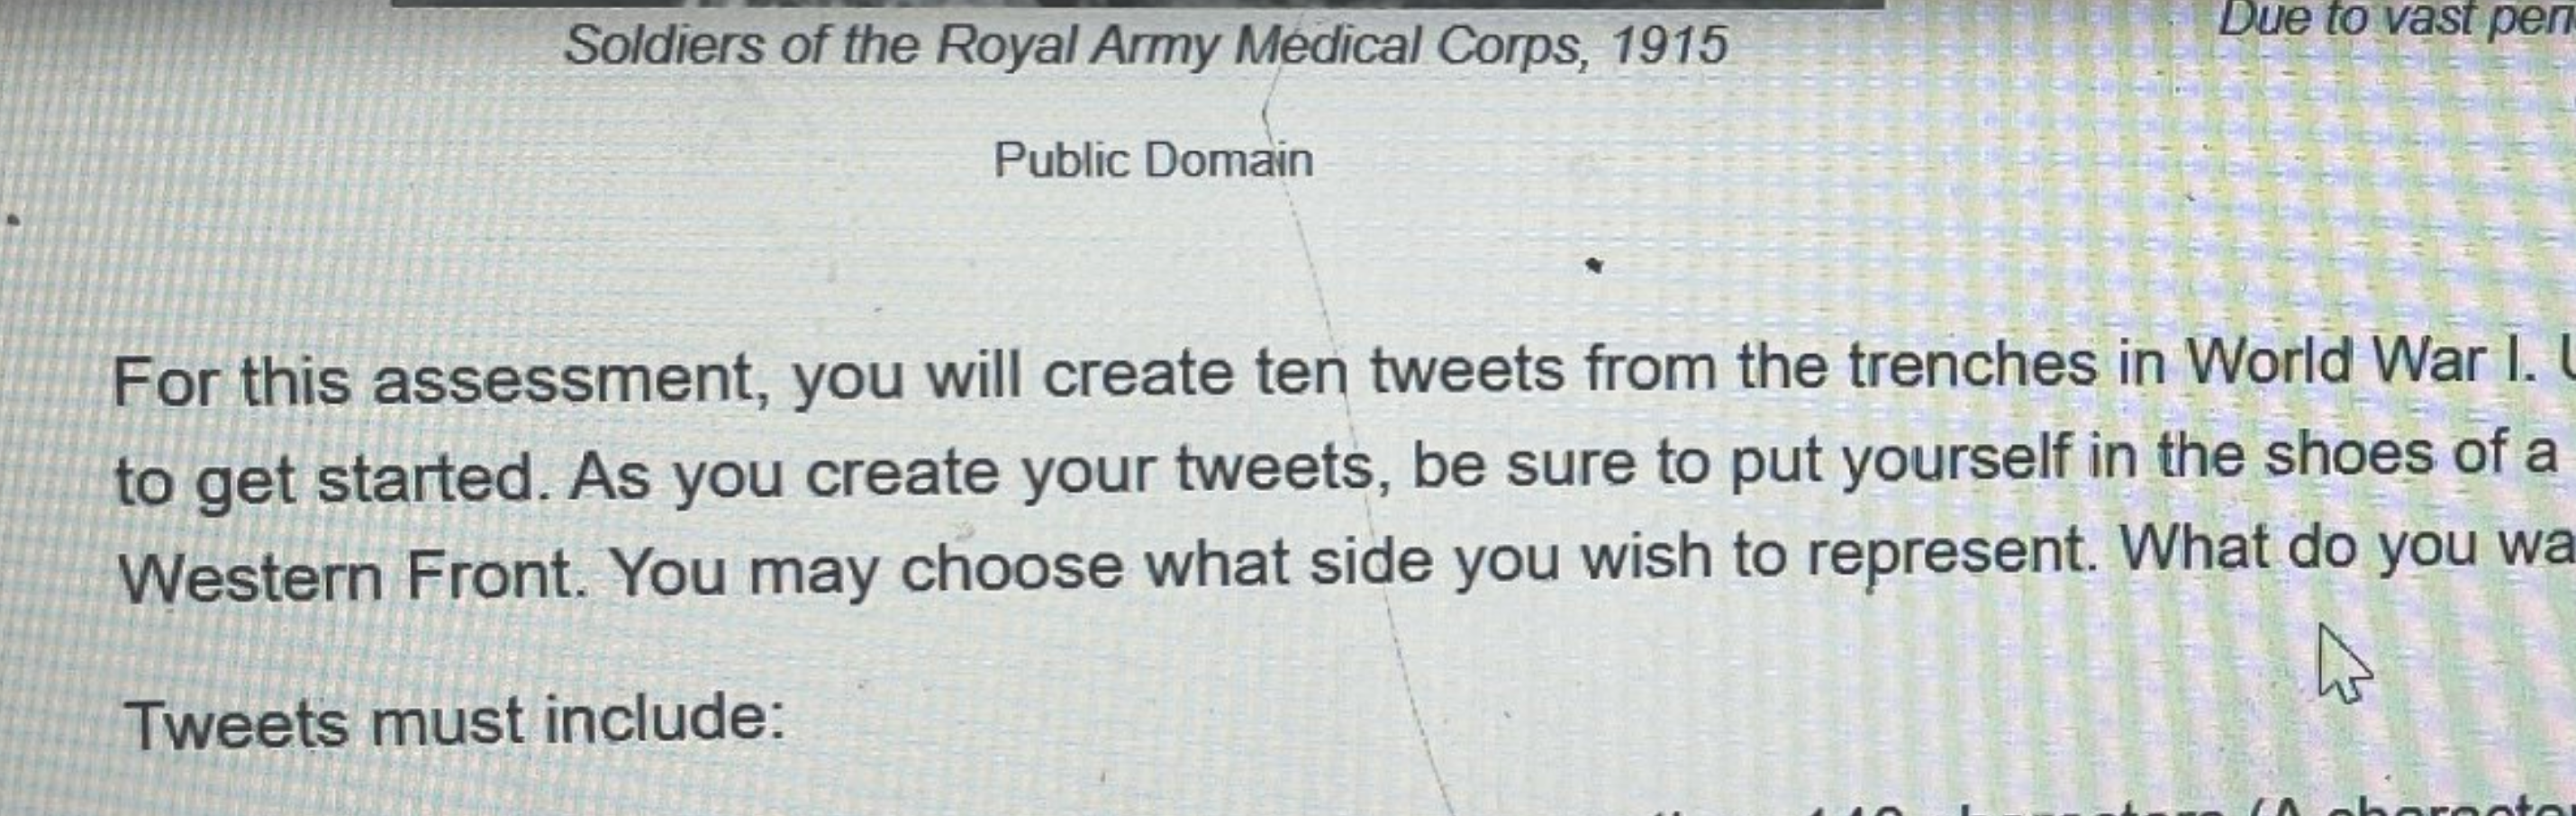 Assignment details for creating historical tweets from the perspective of World War I soldiers